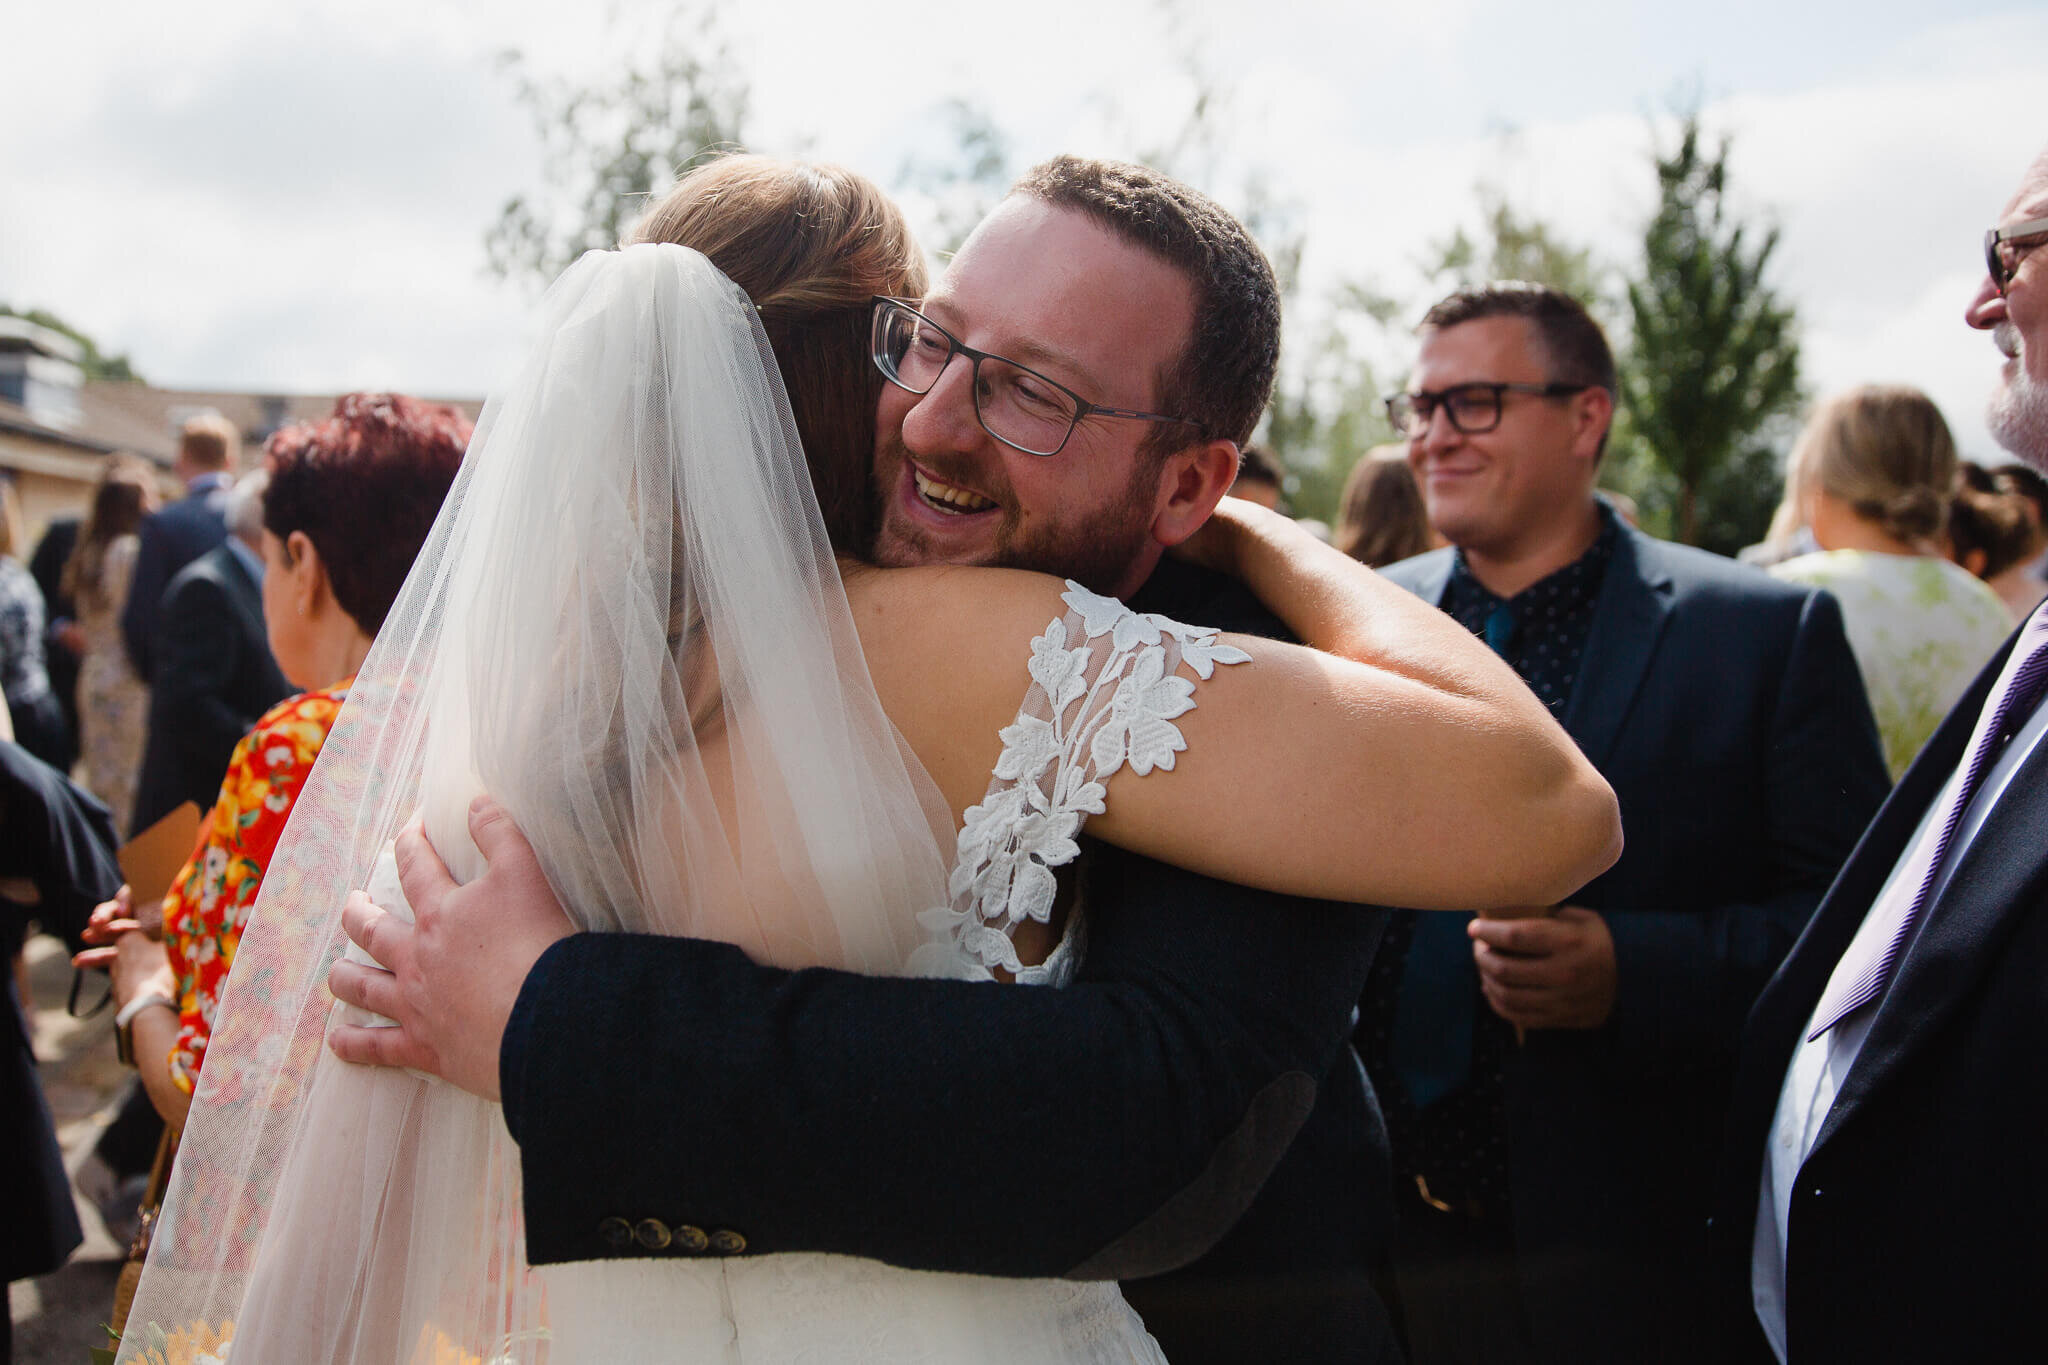 bride hugging guests and being congratulated